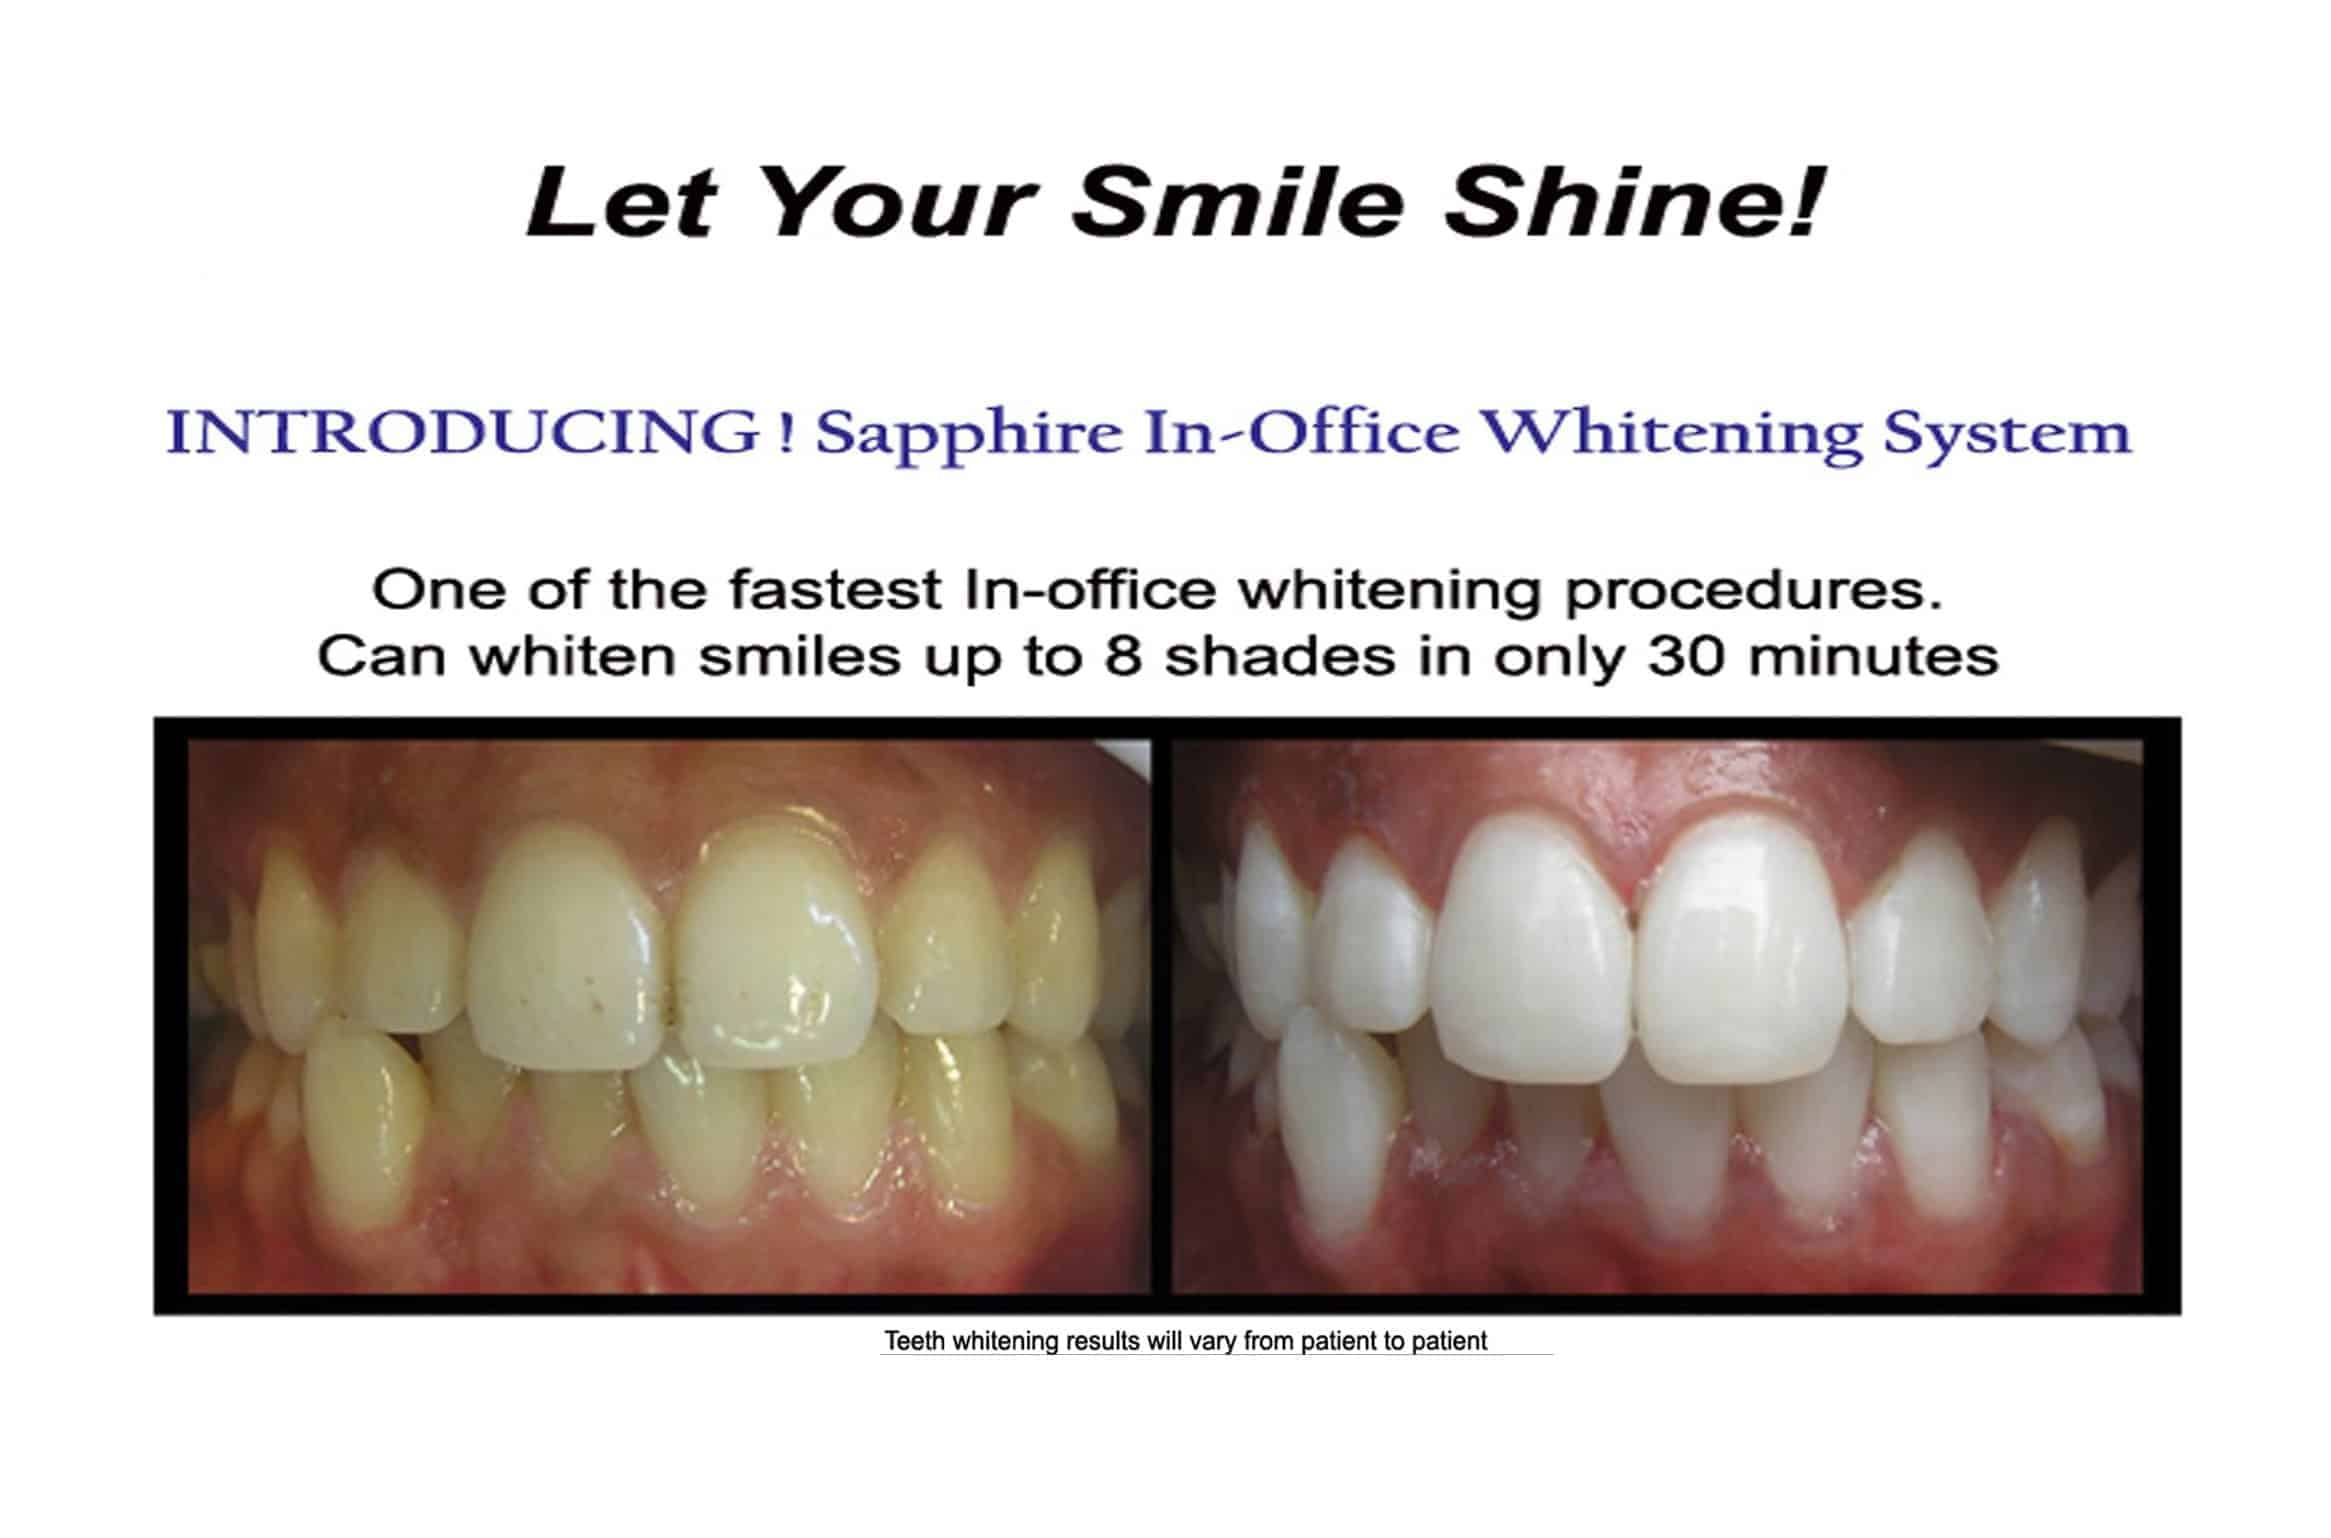 Teeth Whitening Cost and FAQs - How Much Does Teeth Whitening Cost In Melbourne?